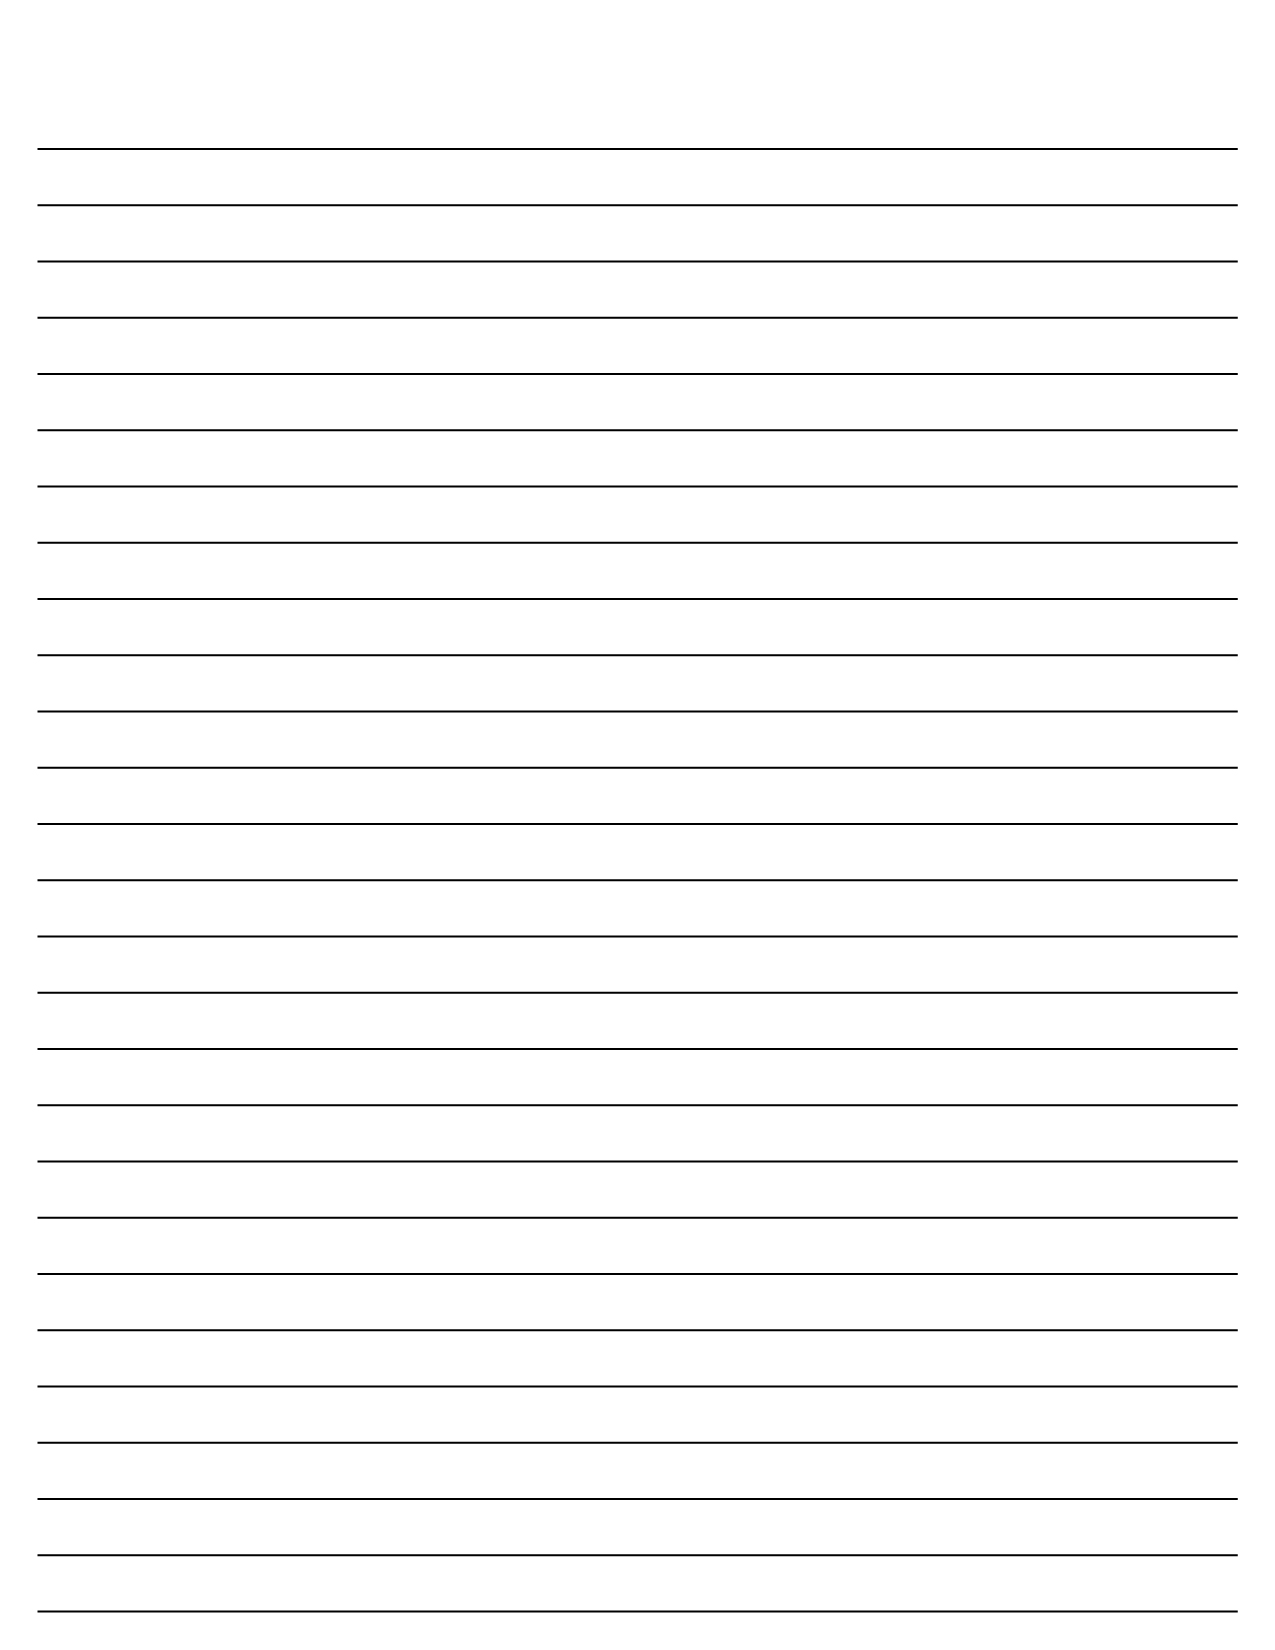 8-best-images-of-printable-sheet-of-lined-paper-printable-lined-paper